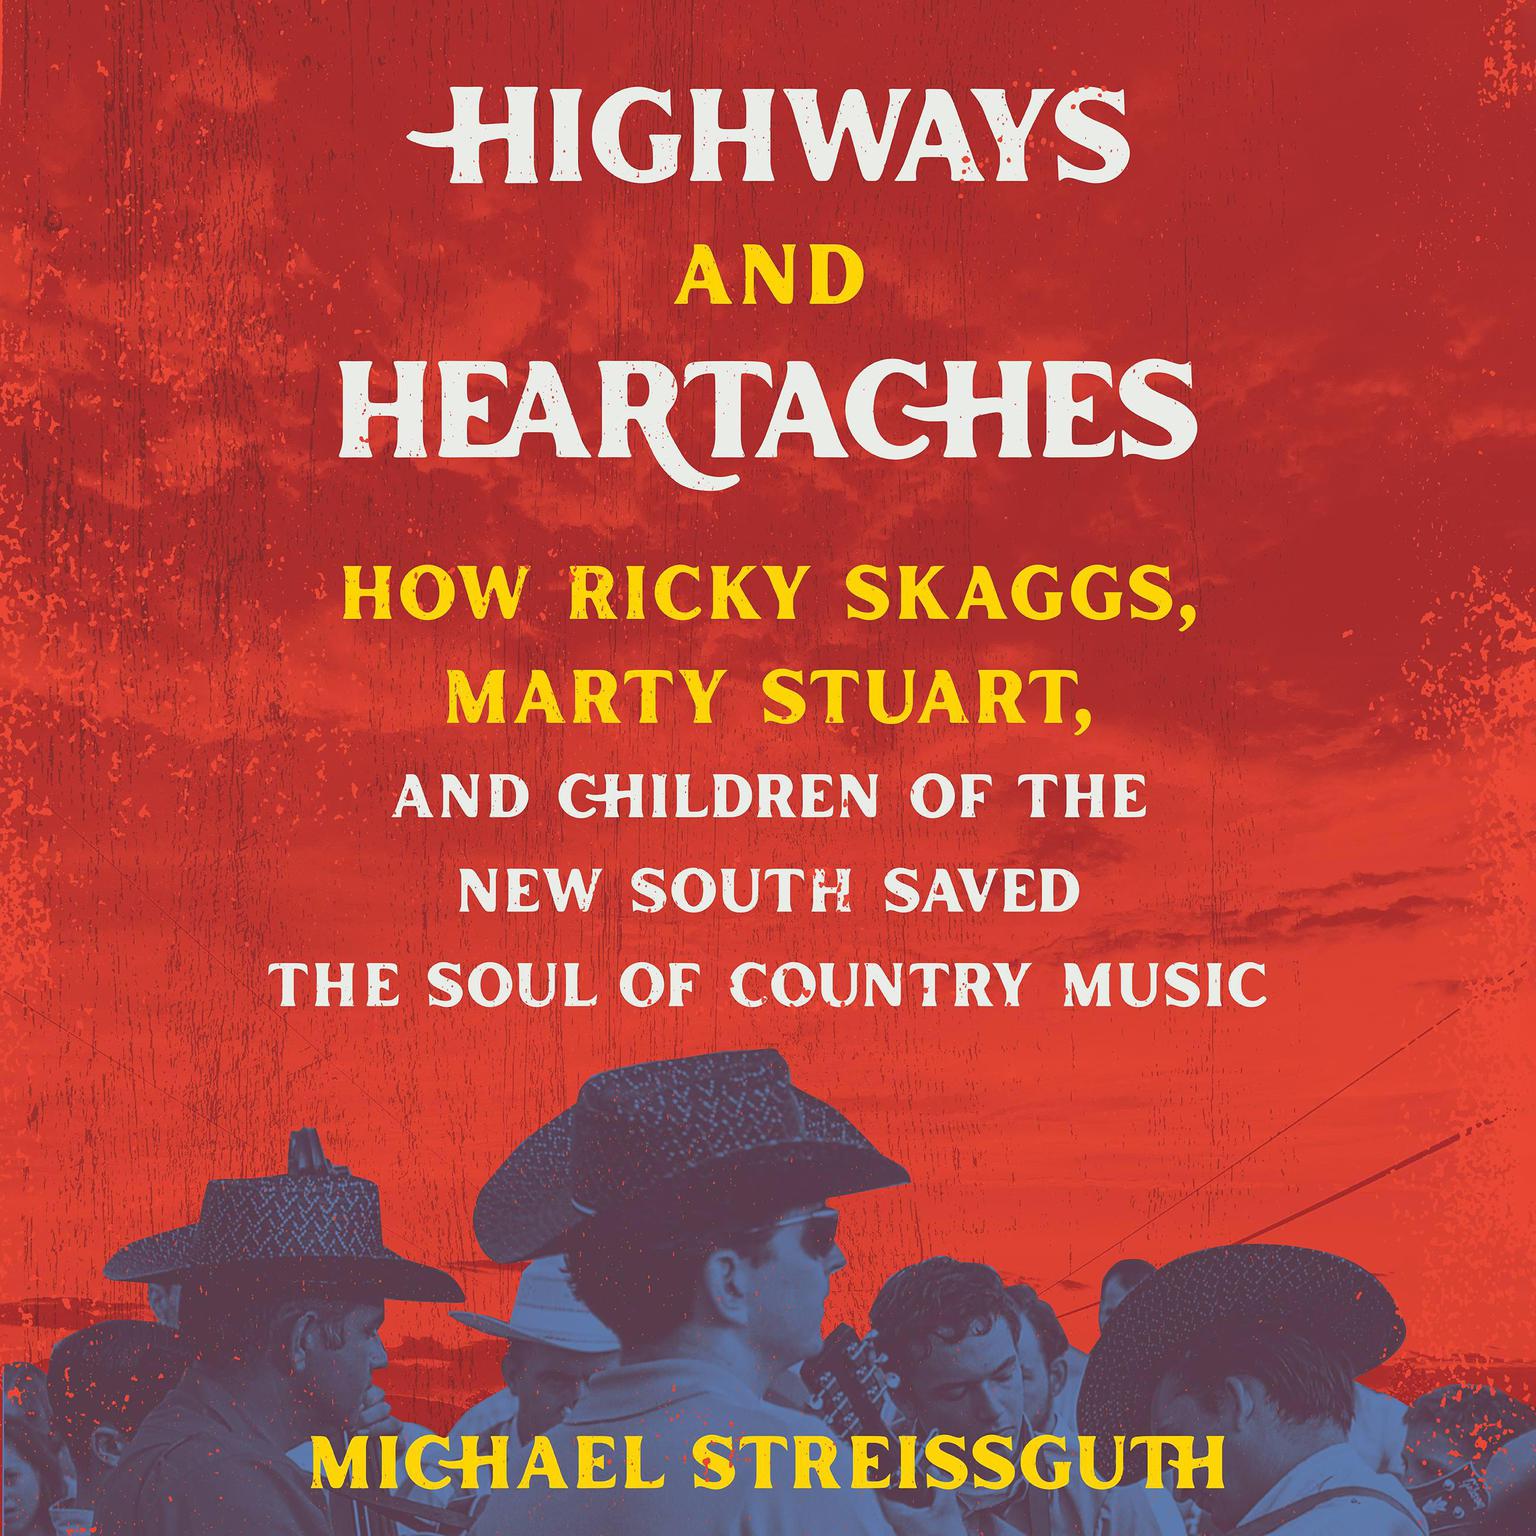 Highways and Heartaches: How Ricky Skaggs, Marty Stuart, and Children of the New South Saved the Soul of Country Music Audiobook, by Michael Streissguth